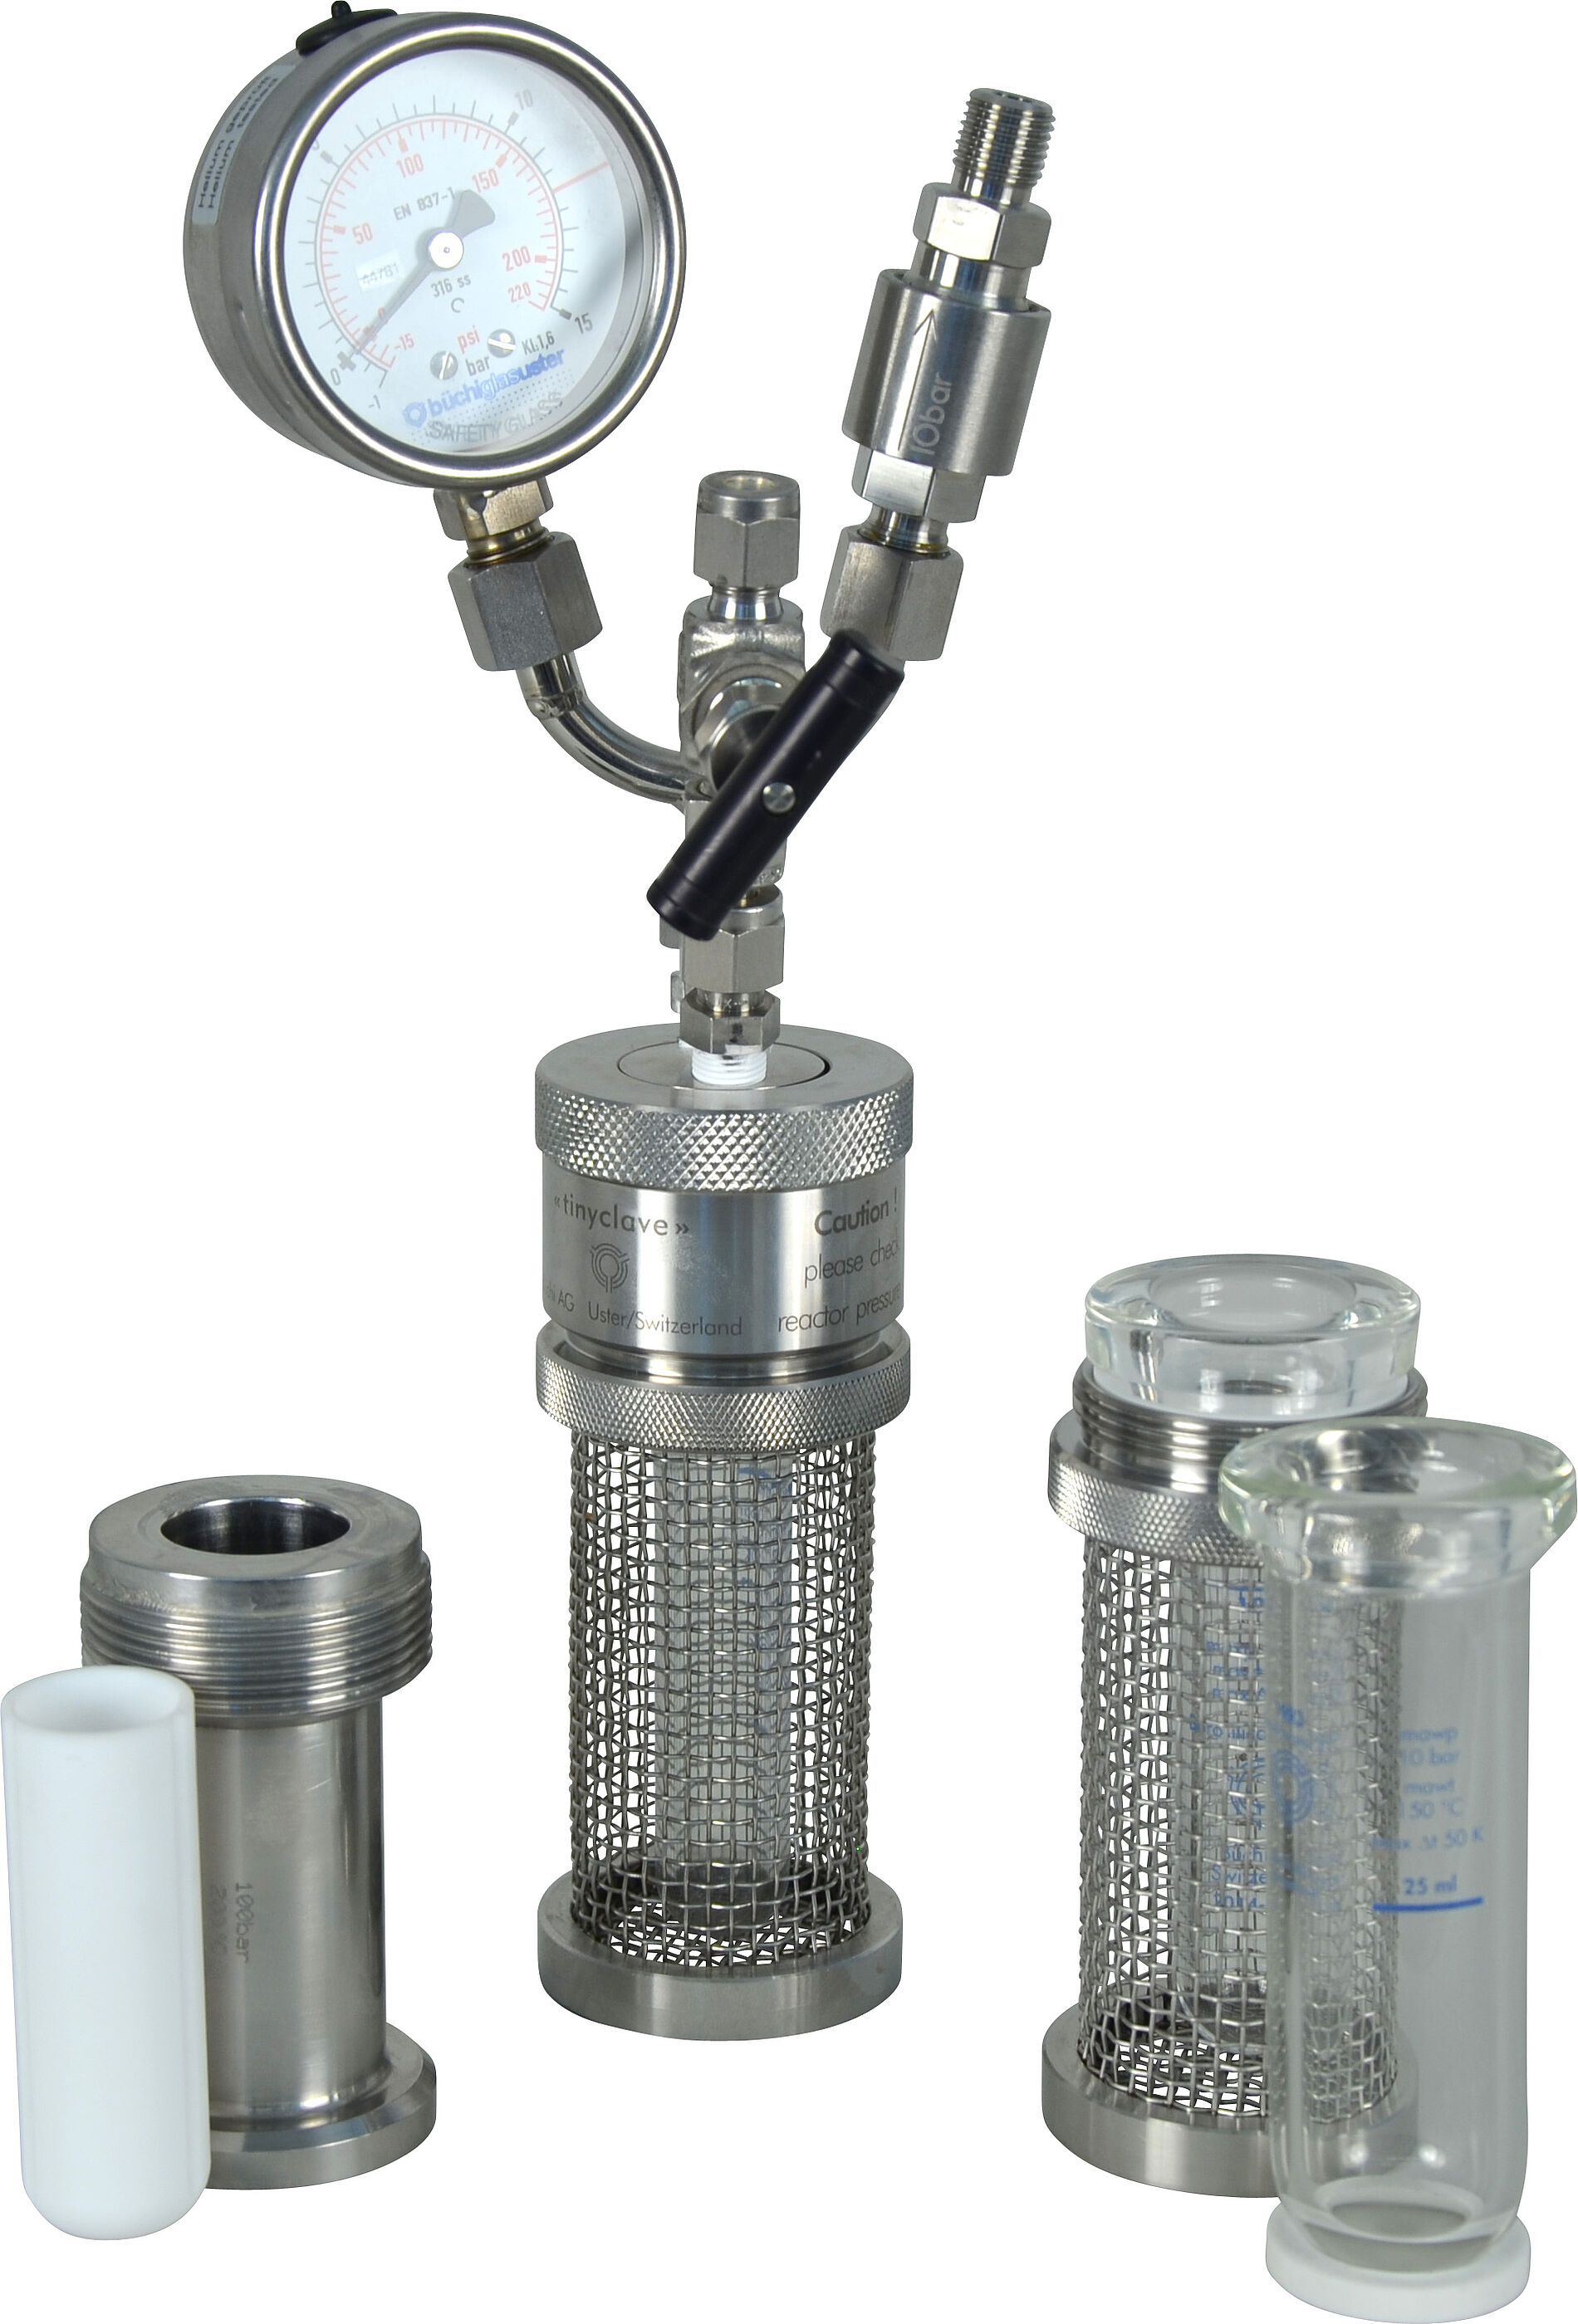 tinyclave pressure reactor for glass- and steel vessel with optinal PTFE insert